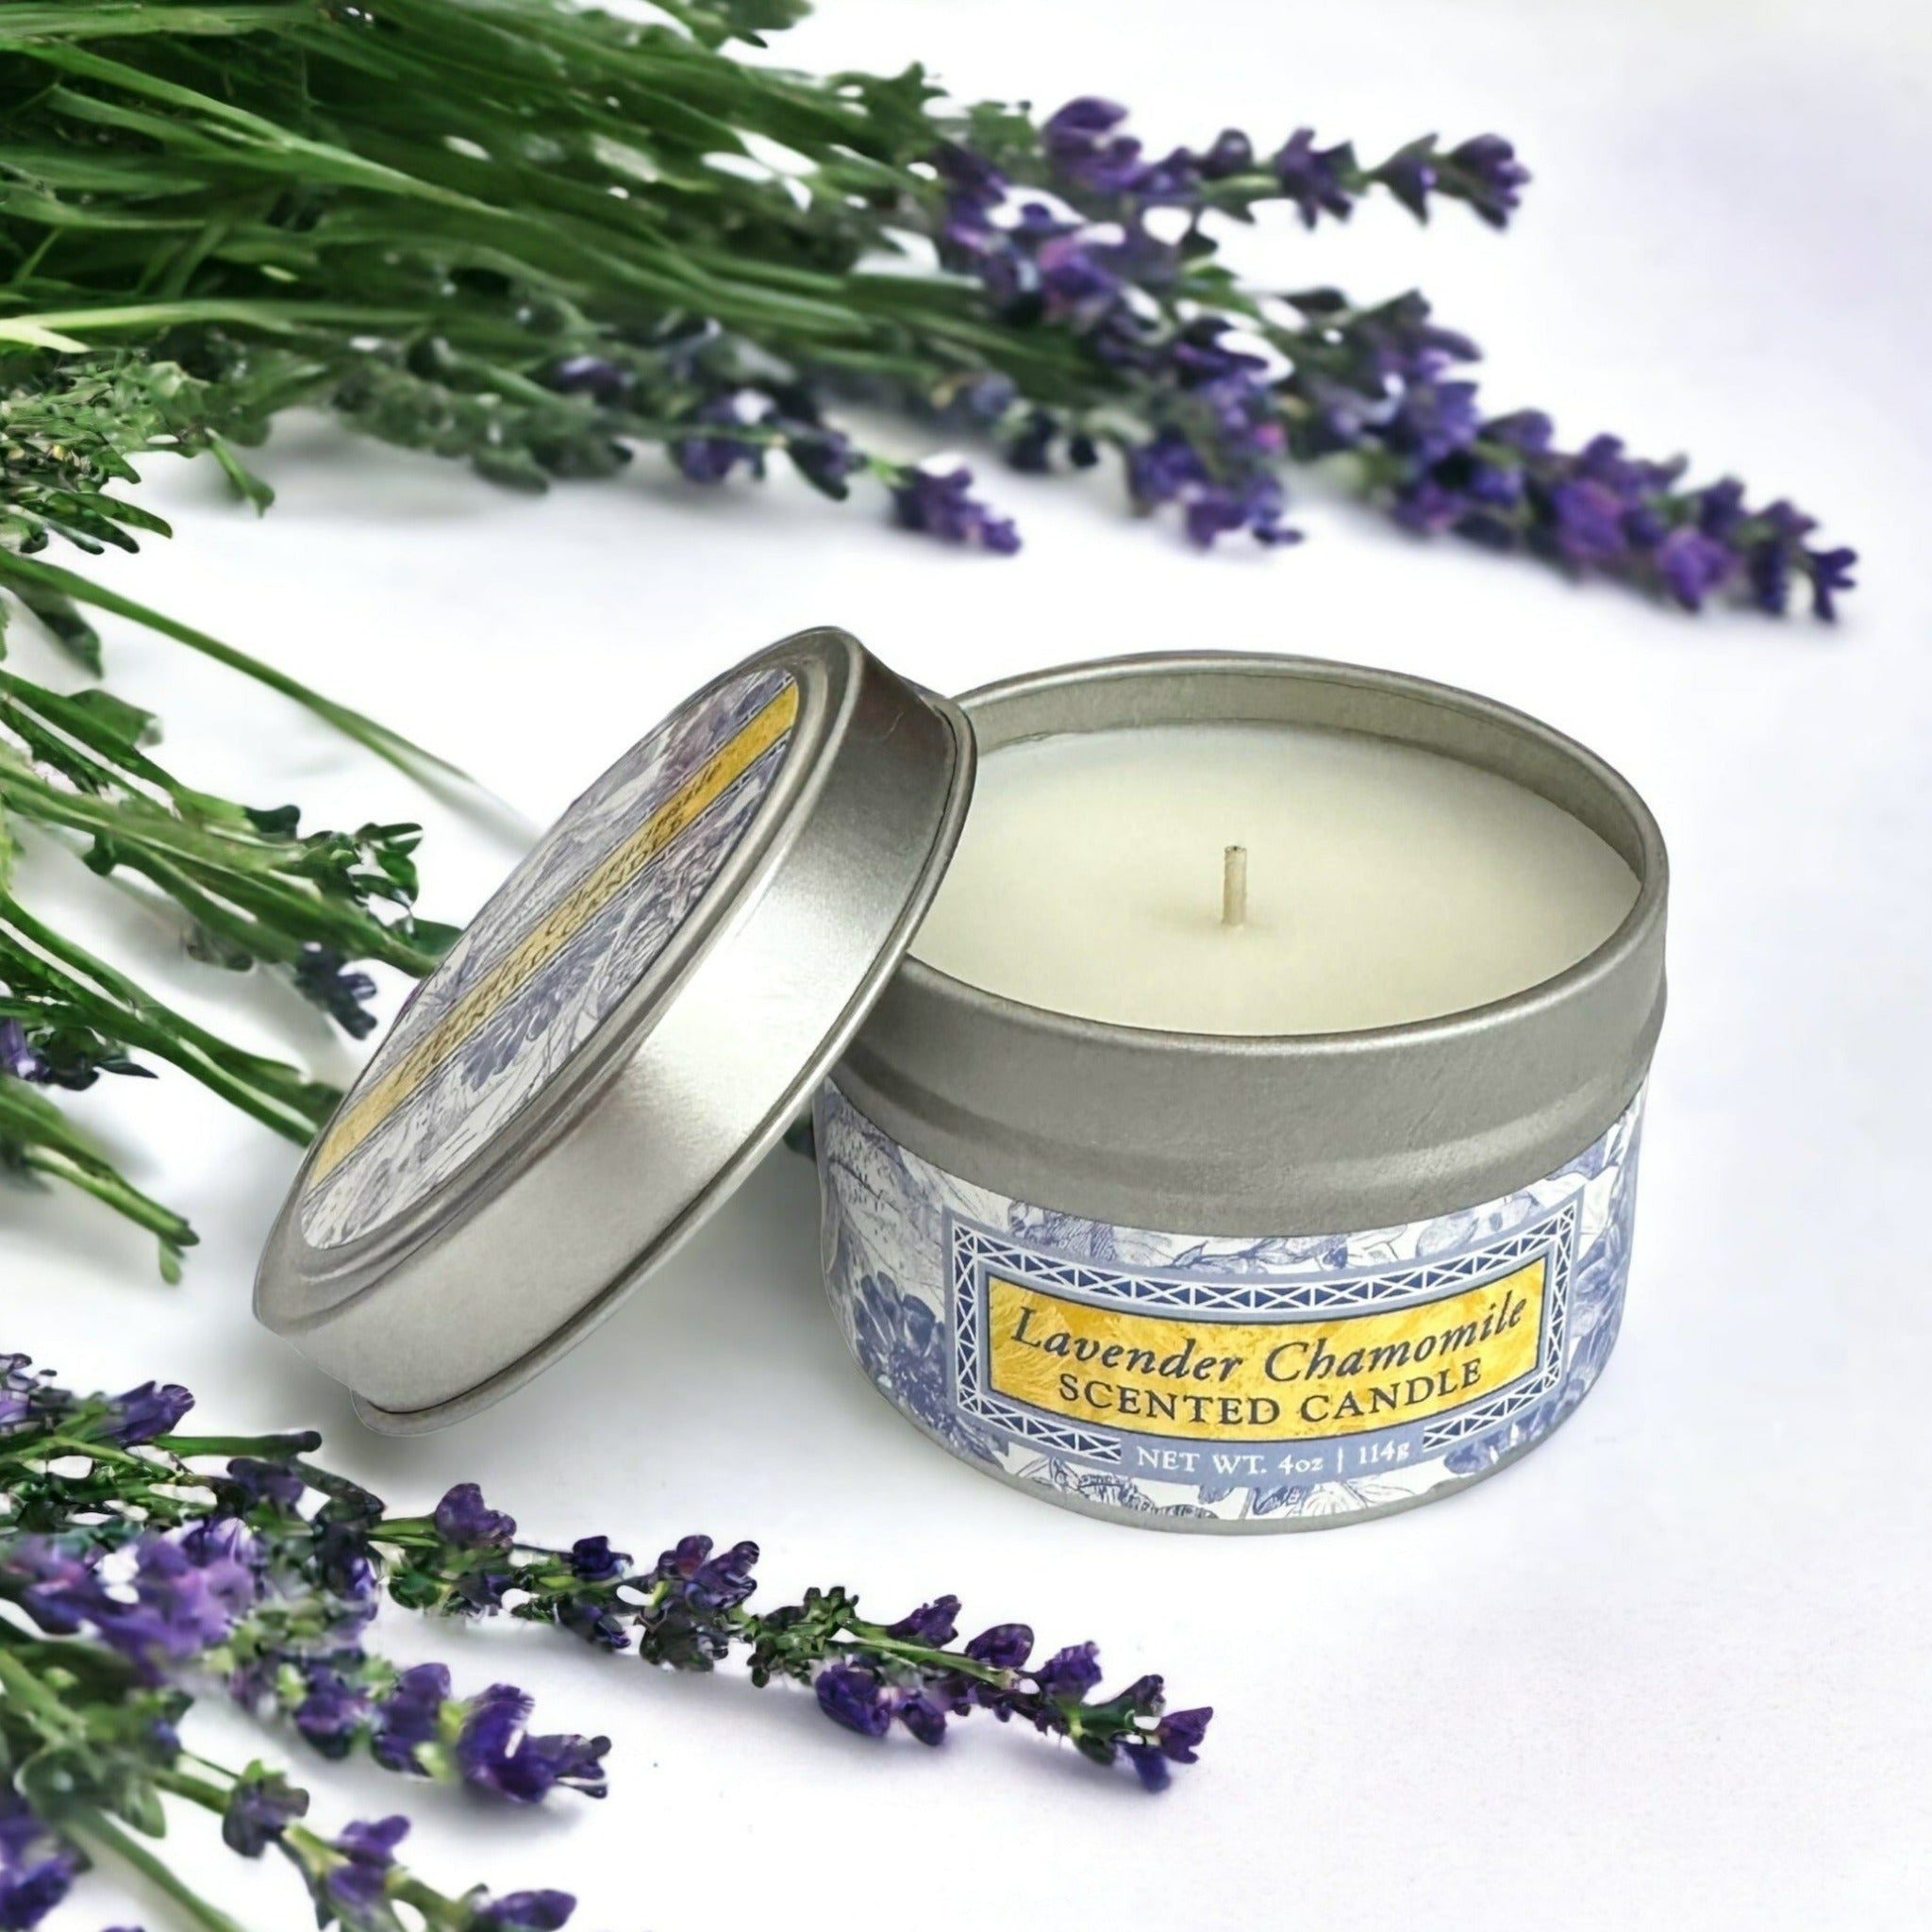 Greenwich Bay Trading Lavender Chamomile Candle